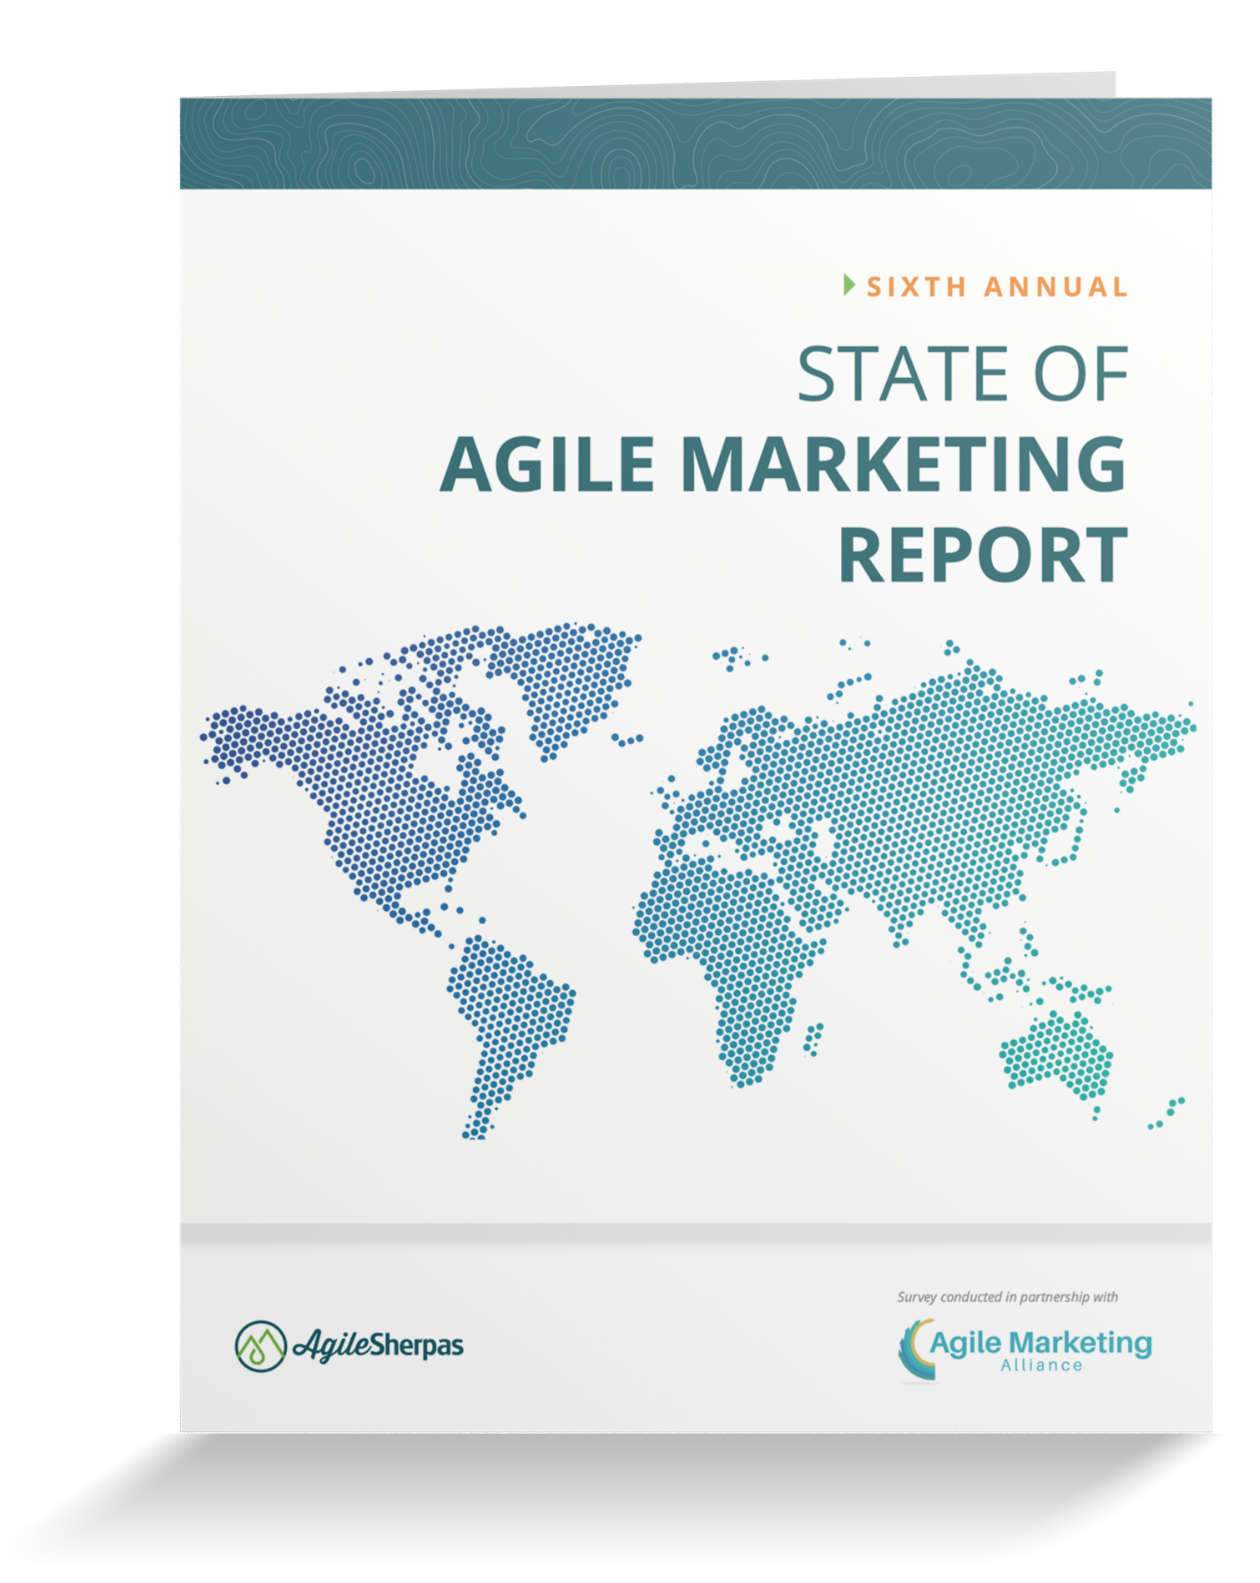 6 Years of the State of Agile Marketing Report AgileSherpas